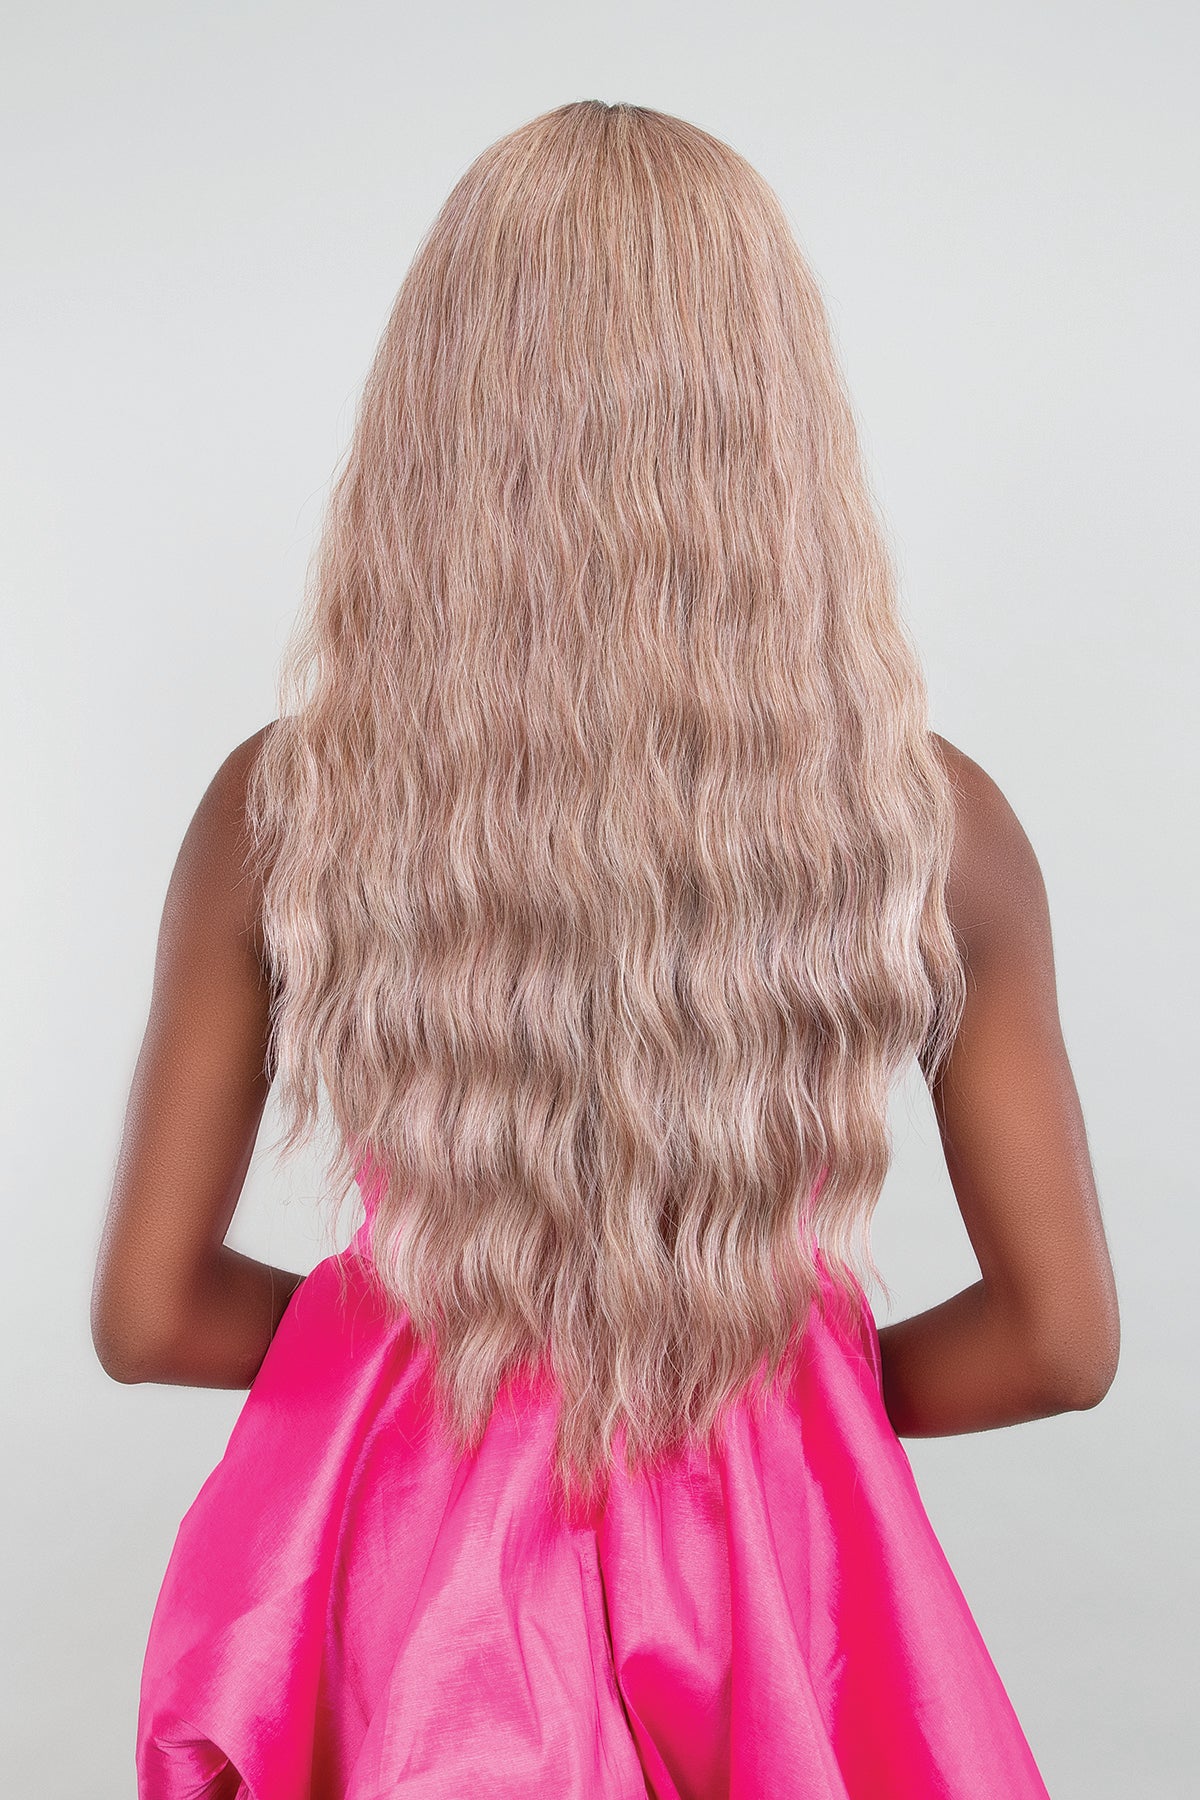 MELT EXTENDED PART LACE ANGEL WIG